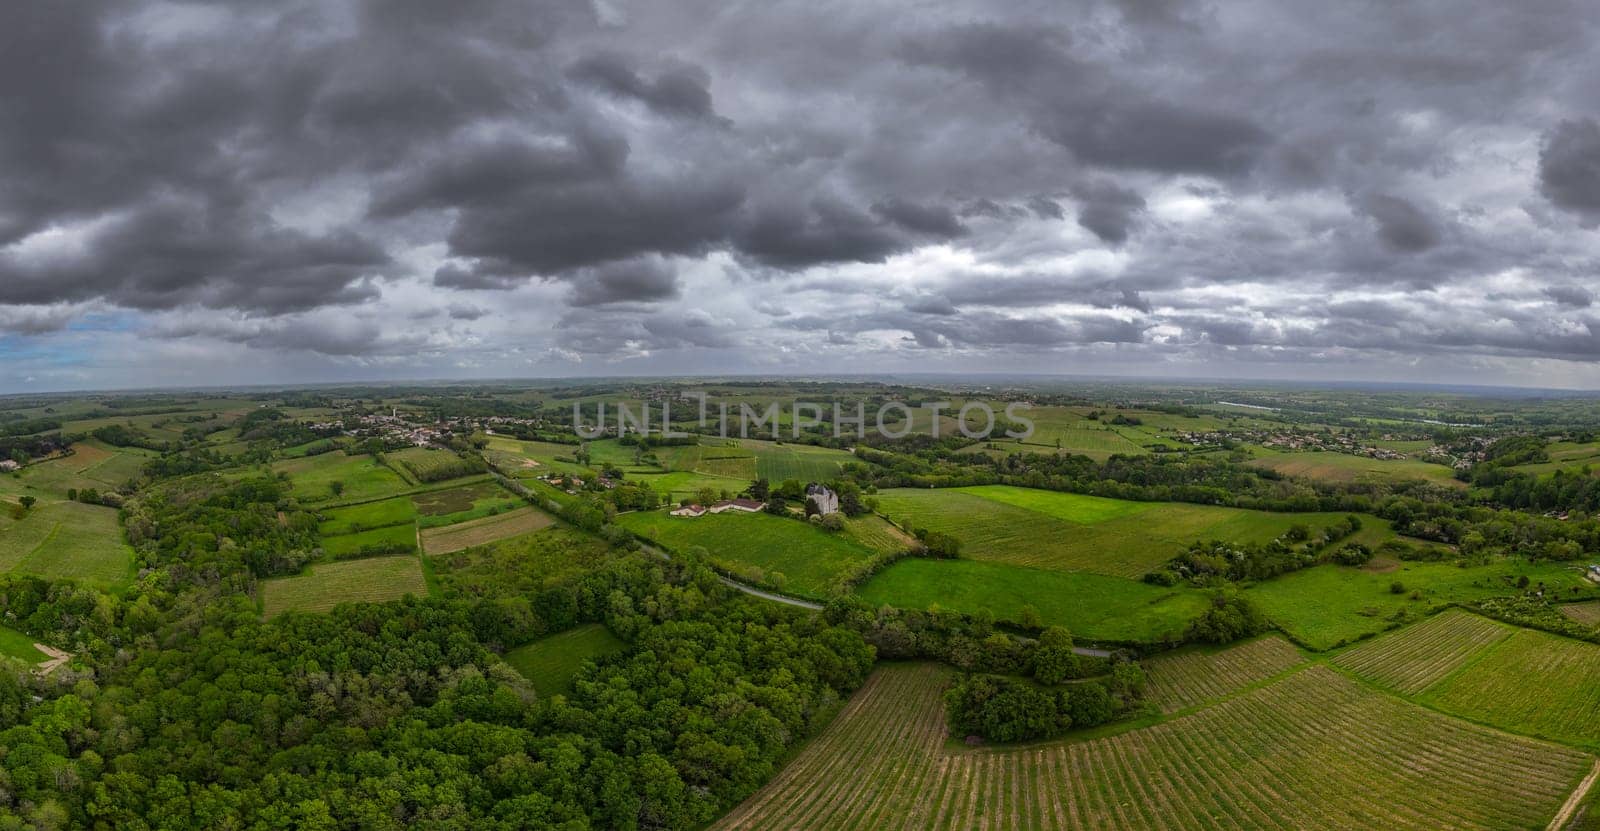 Aerial view of Bordeaux vineyard at spring under cloudy sky, Rions, Gironde, France by FreeProd